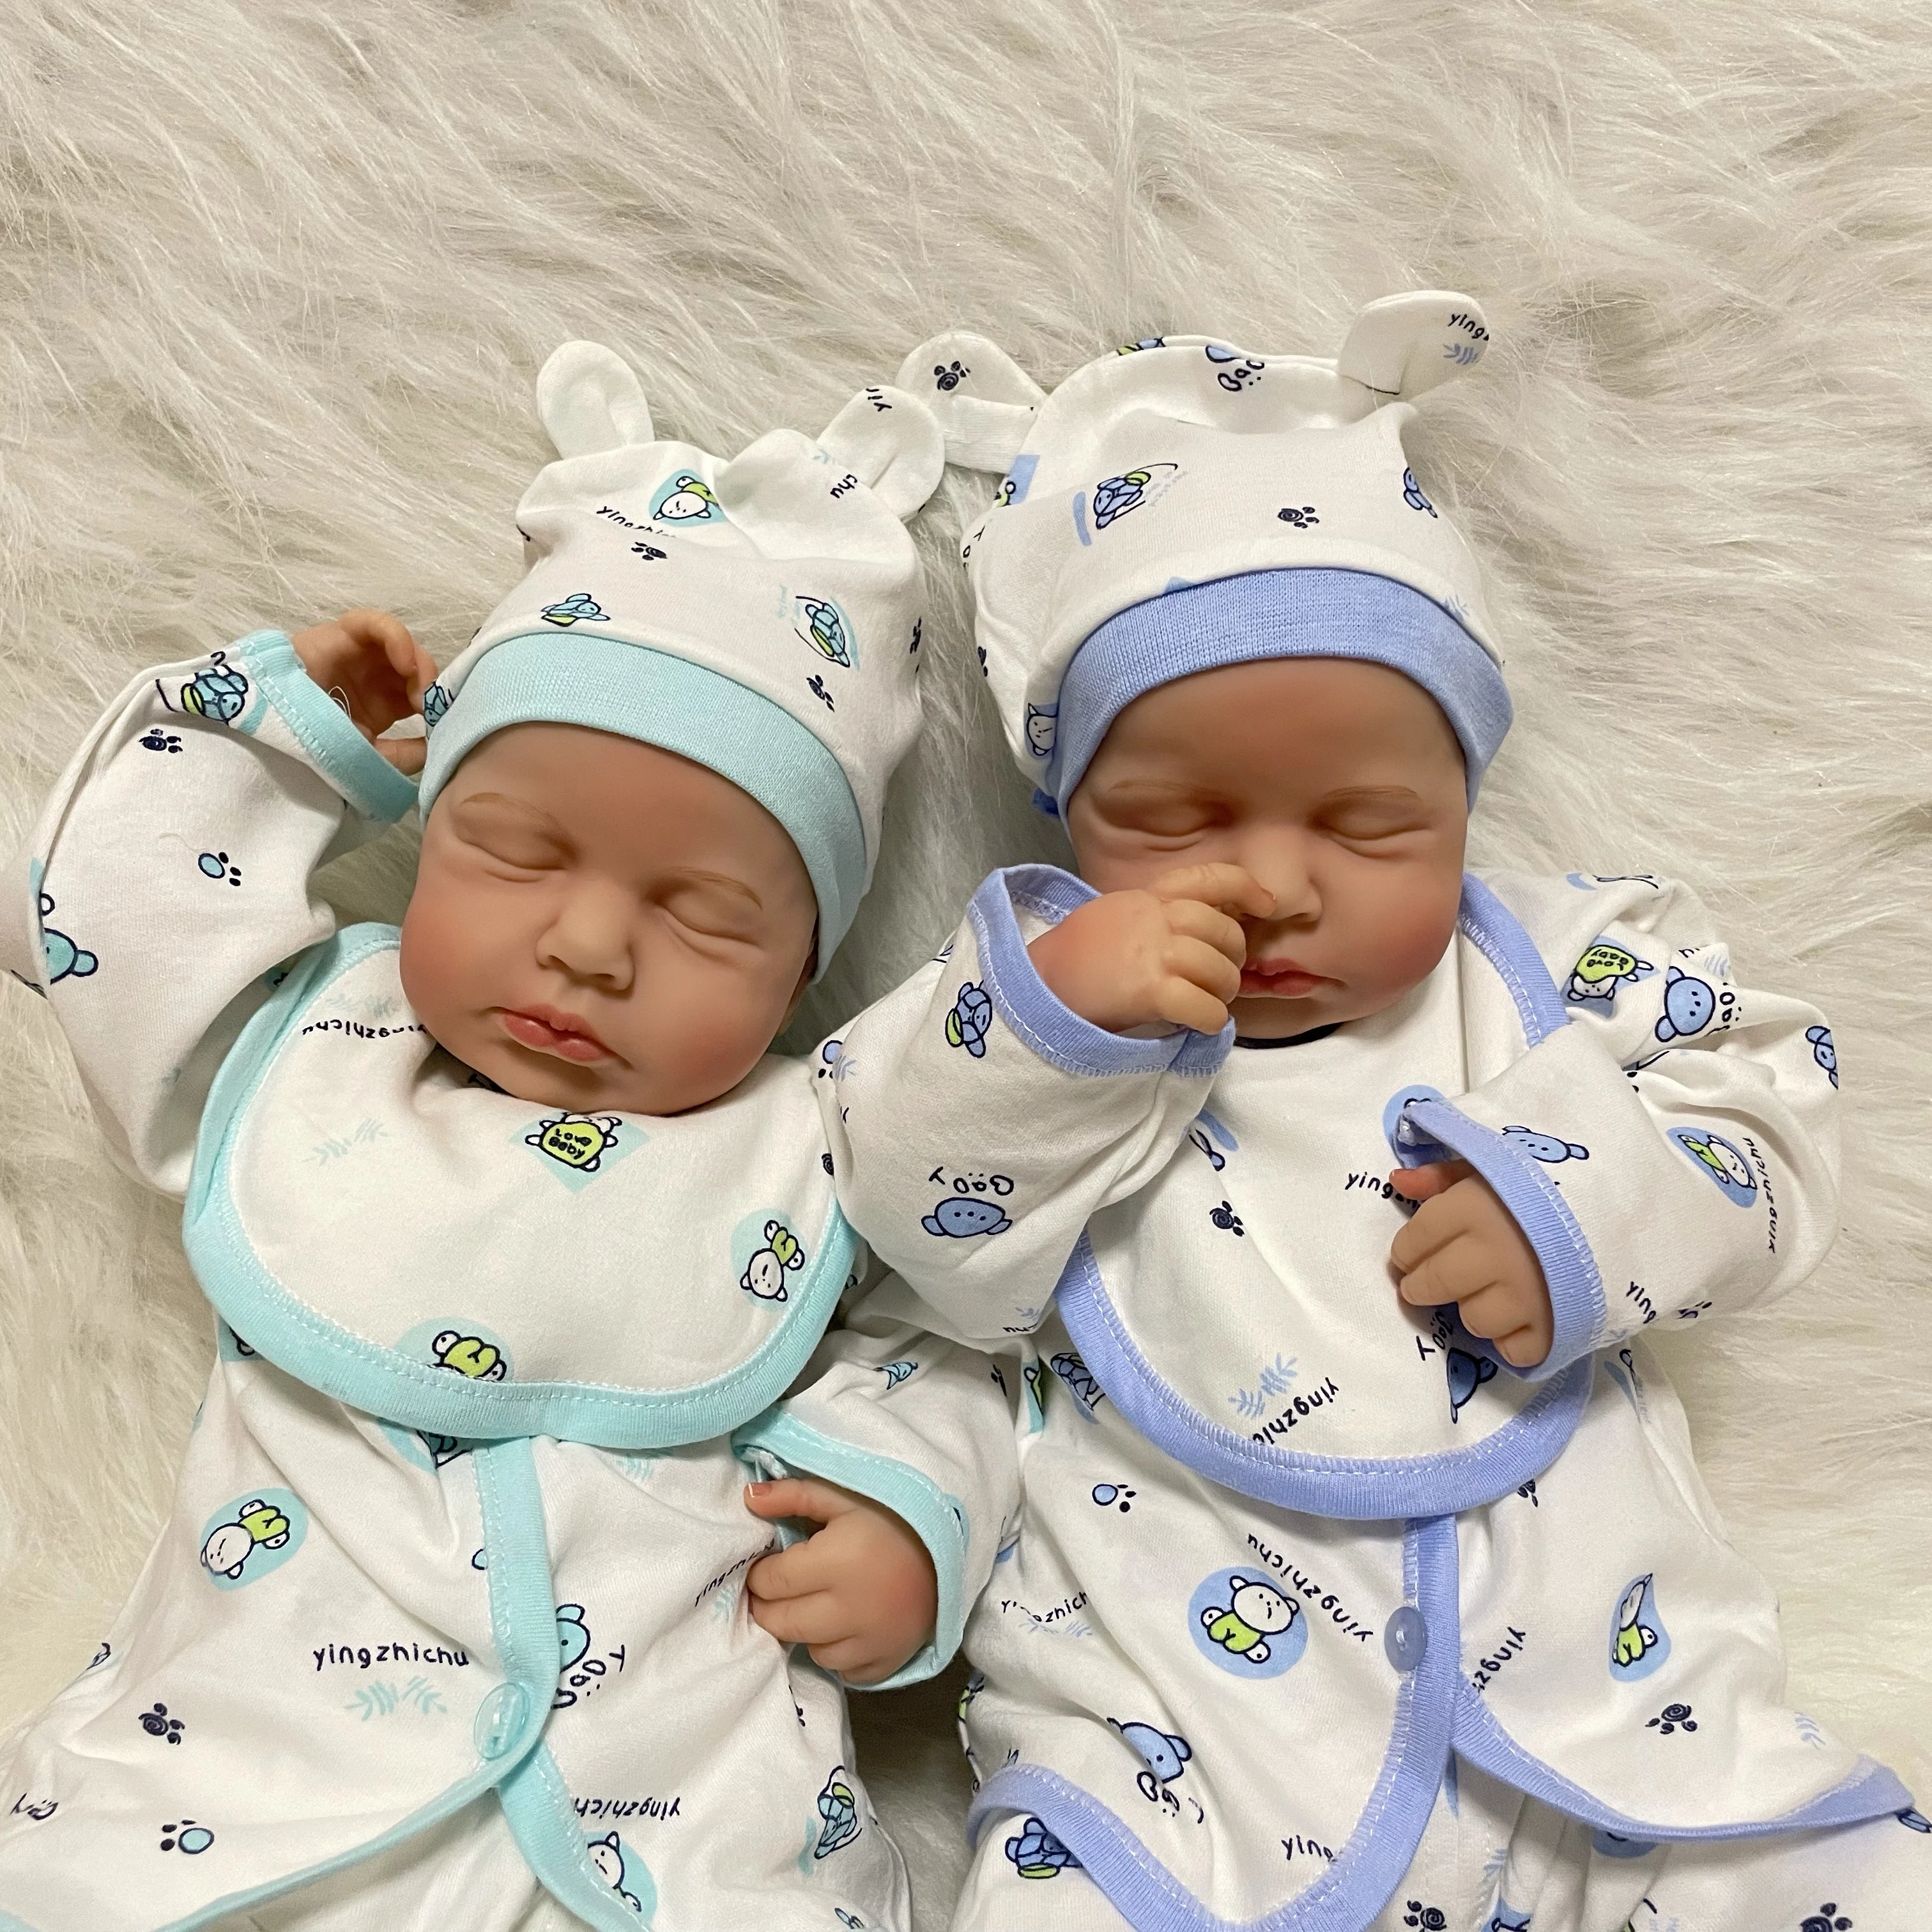 

Bebe Reborn Baby Doll LouLou Twins Baby Realistic Like Real Baby Painted Finished LouLou Ready Reborn Boy Christmas Gift